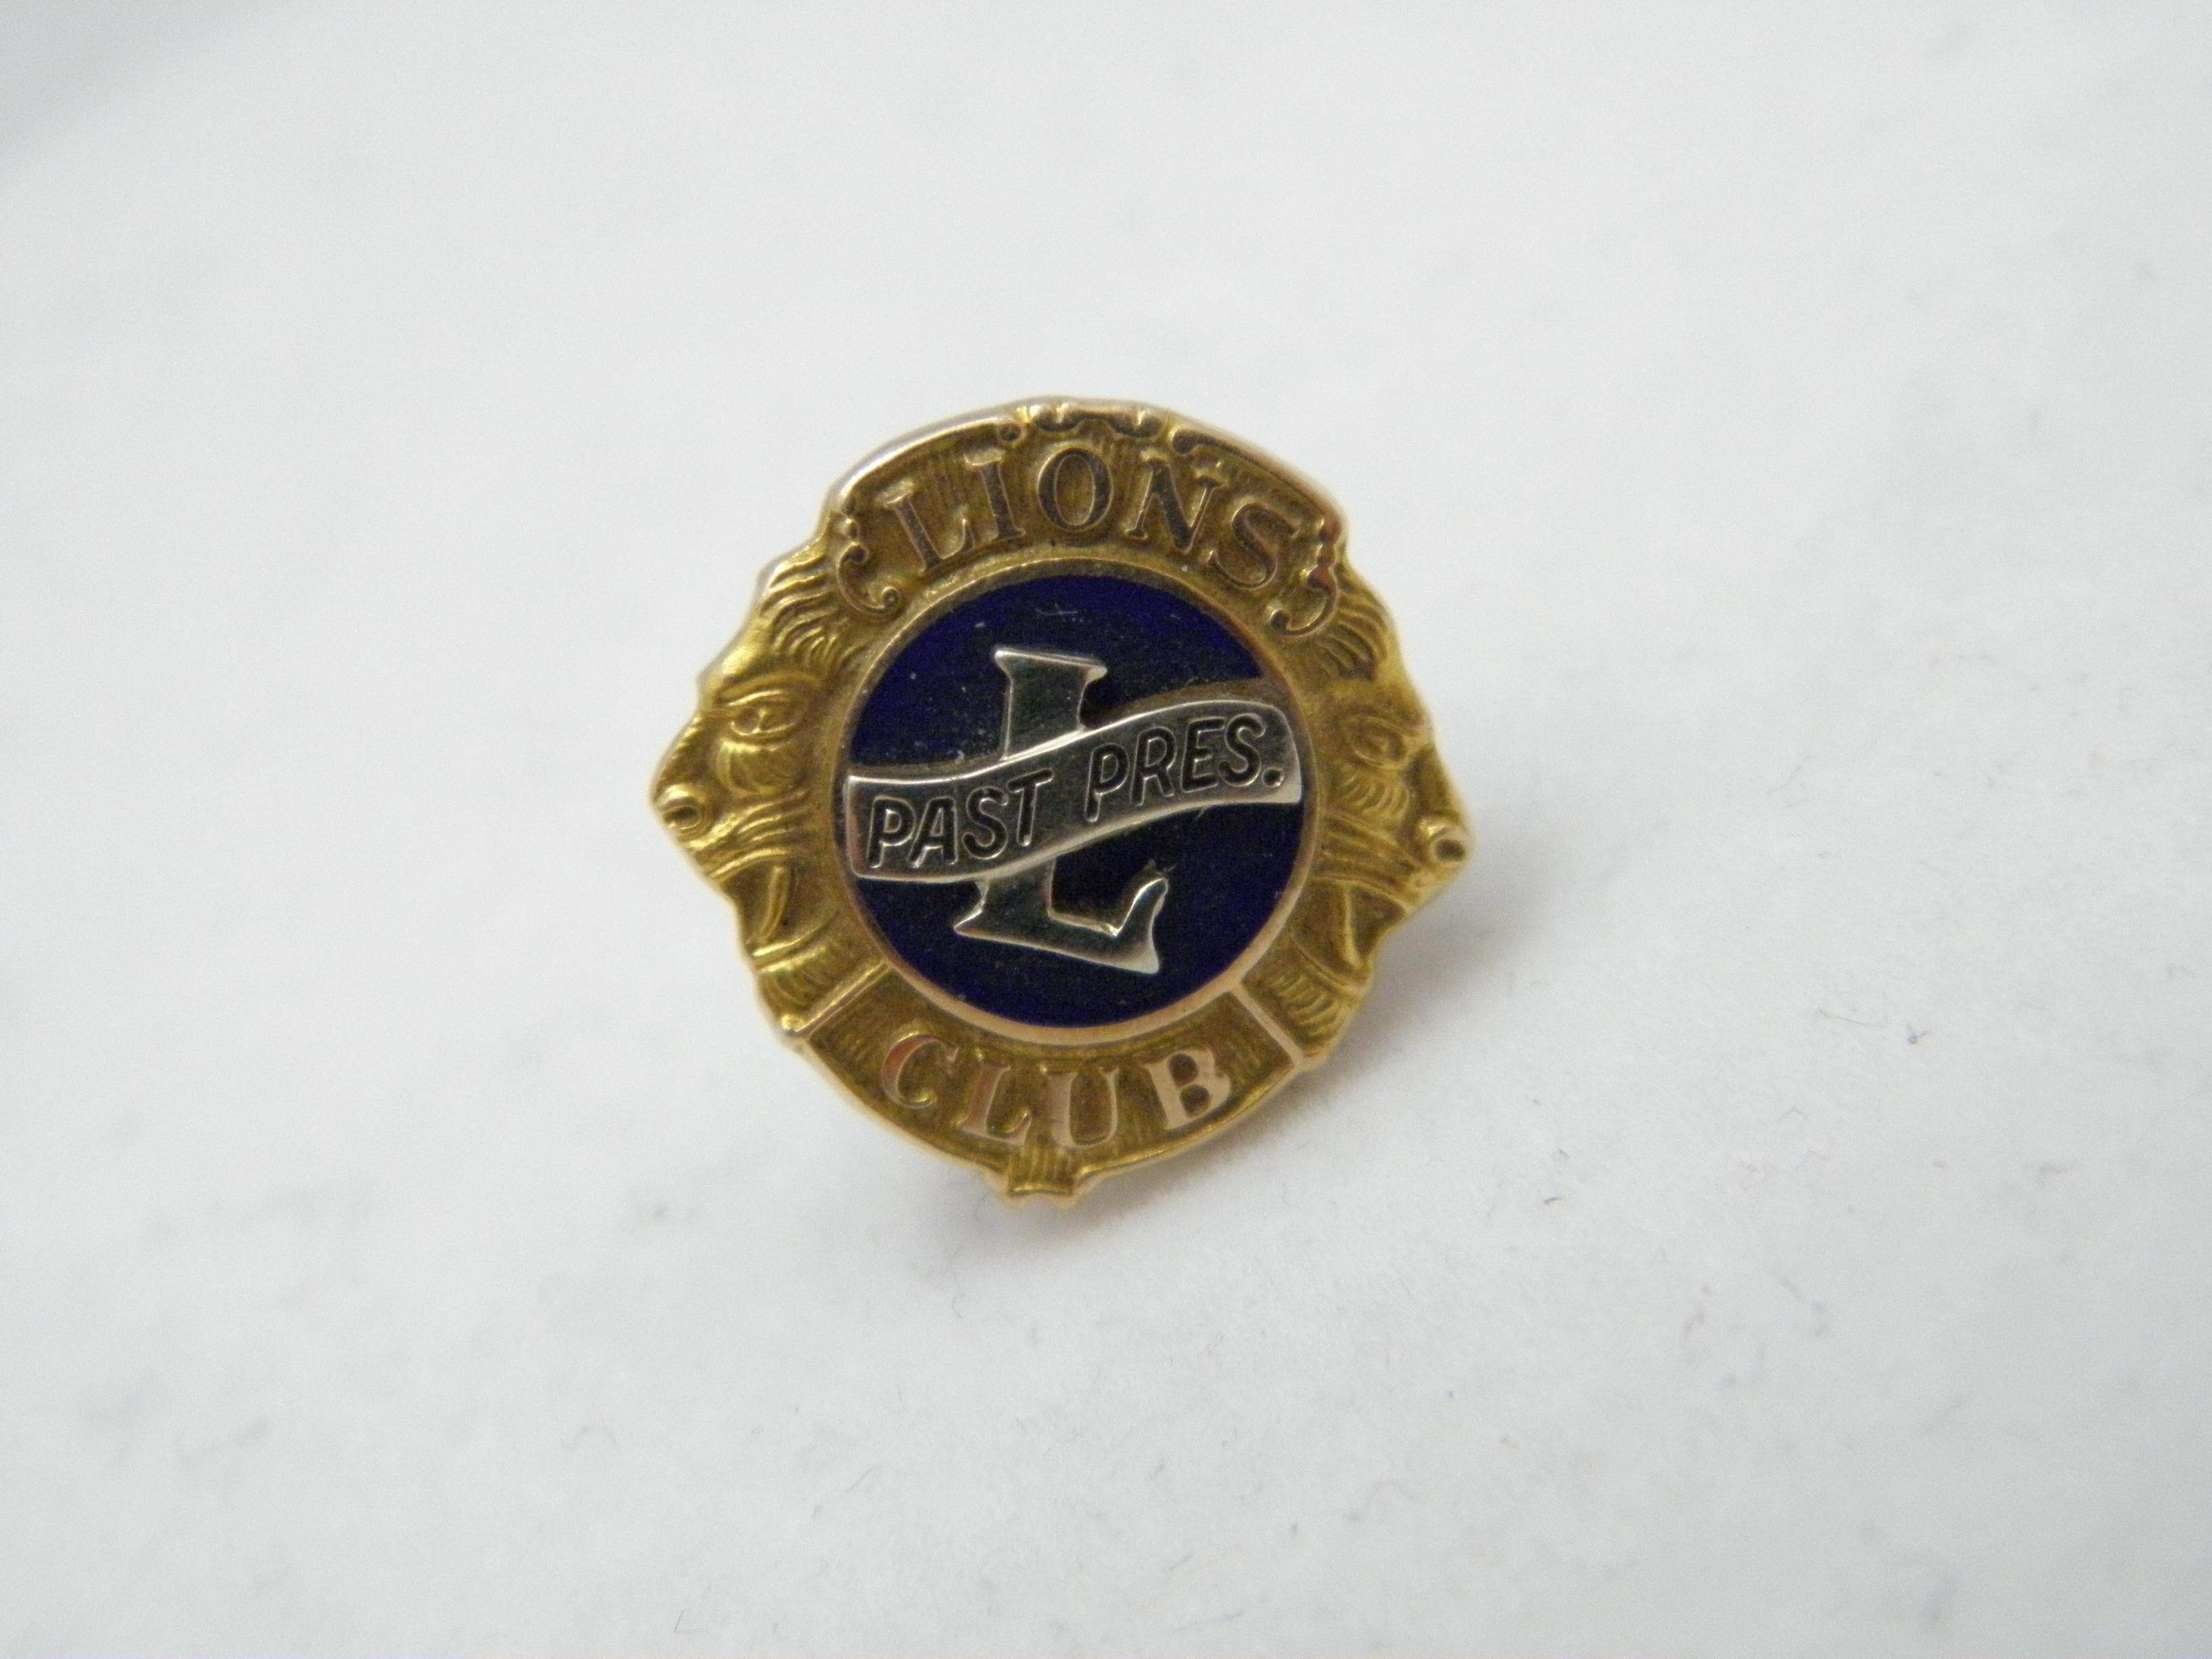 If you have landed on this page then you have an eye for beauty.

On offer is this gorgeous

10CT SOLID GOLD LIONS CLUB PAST PRESIDENT TIE / LAPEL PIN BROOCH

DETAILS
Material: 10ct (417/000) Solid Yellow Gold
Style: Classic Lions Club emblem